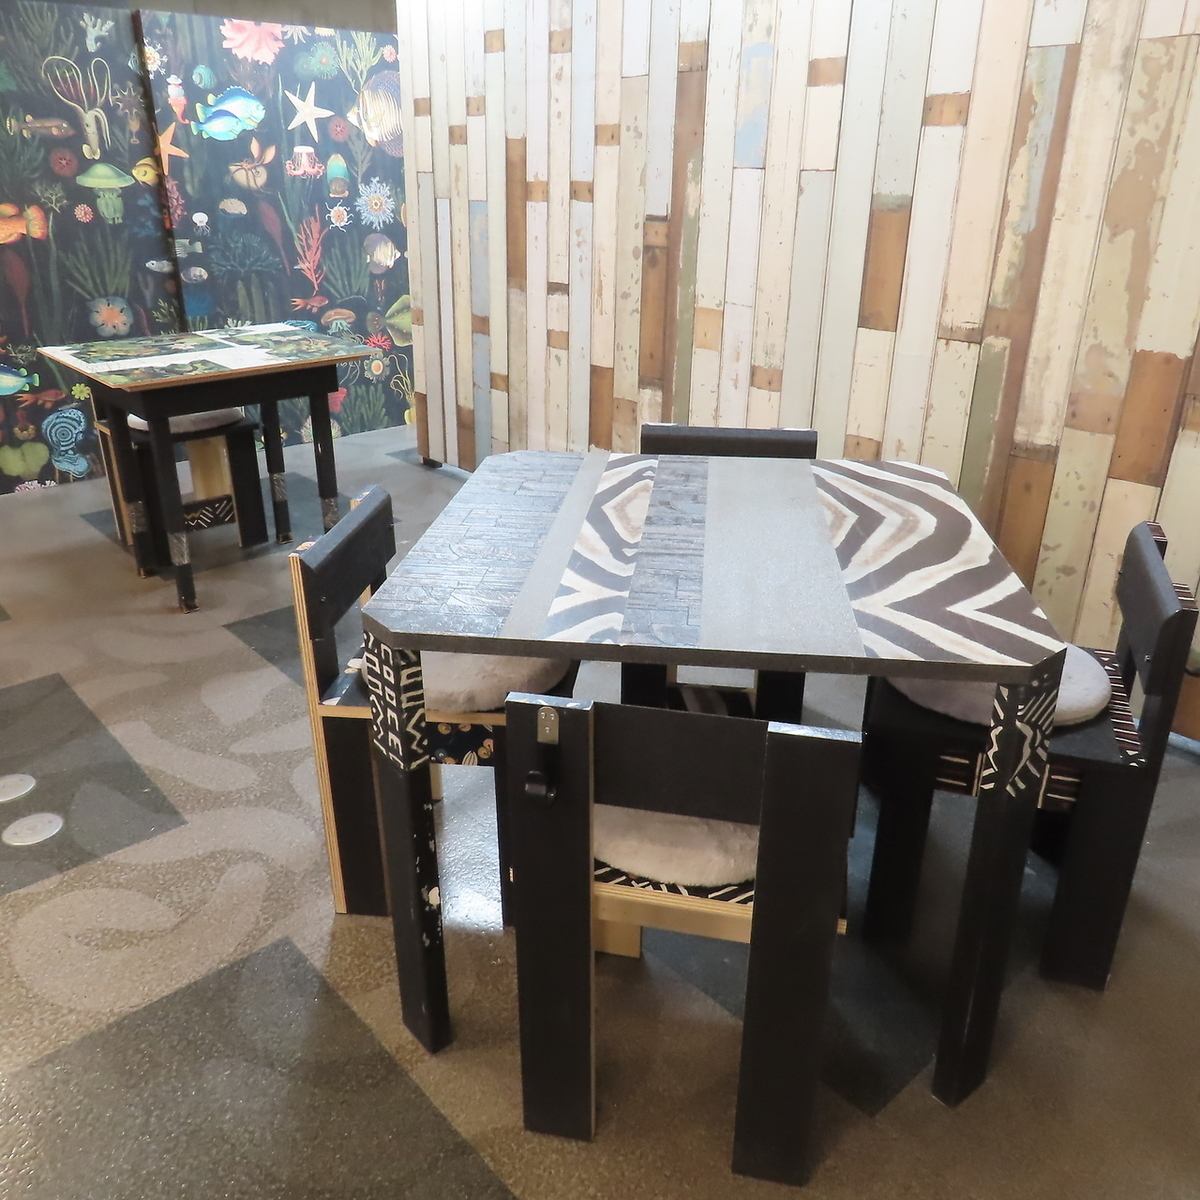 This is a store designed by a designer.Each table has a different pattern♪